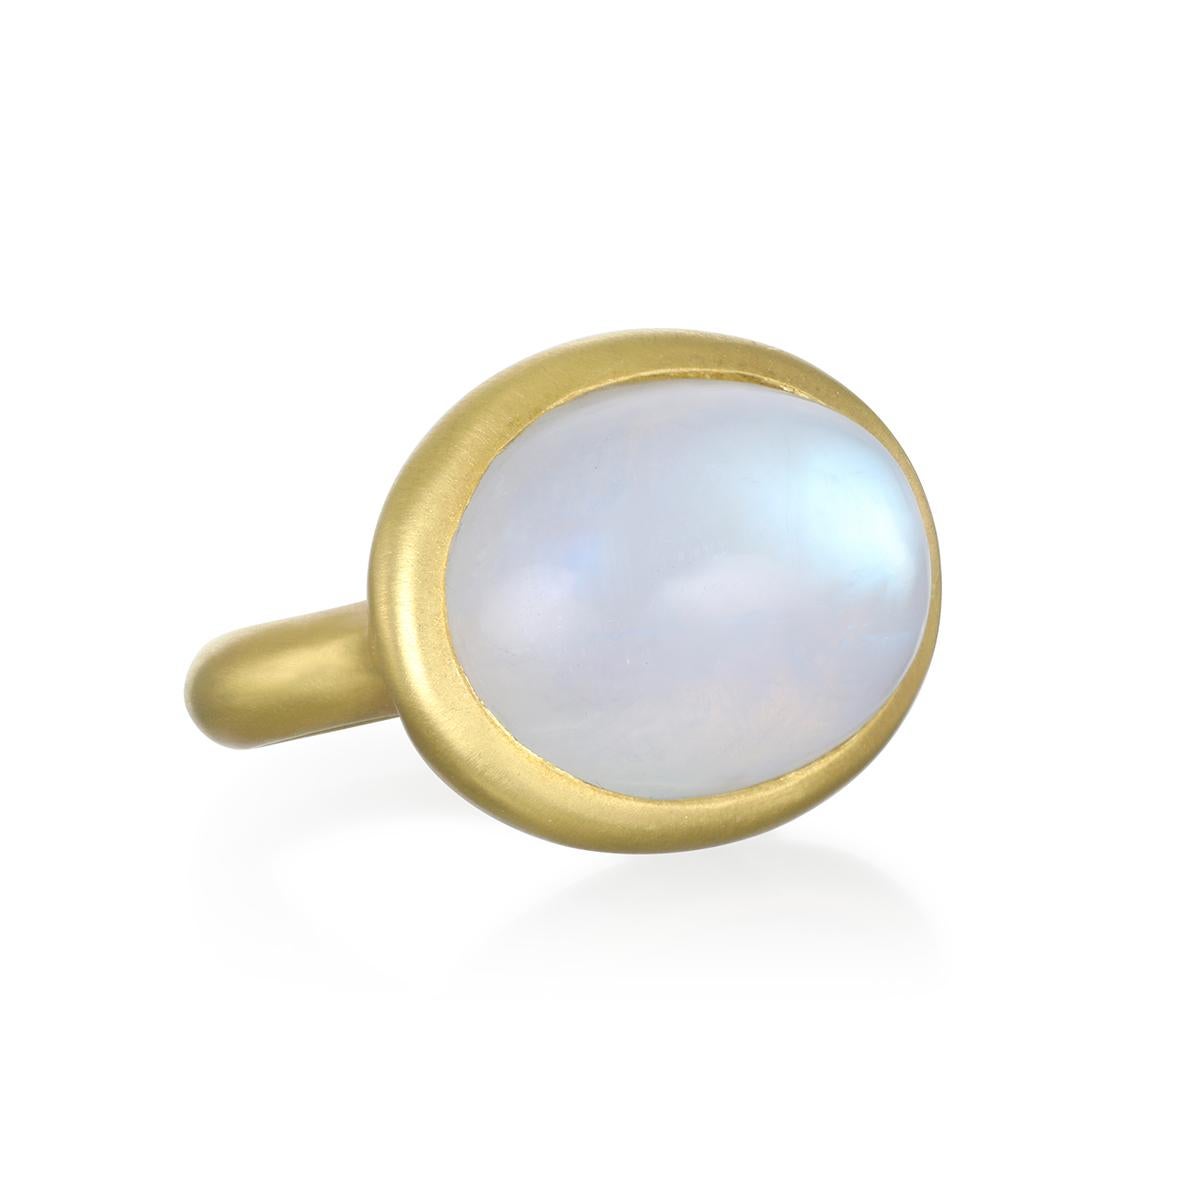 Considered to be a stone of inner growth and strength, this mesmerizing rainbow moonstone has been bezel set by designer Faye Kim in 18k gold and reflects a bluish, milky light that has been compared to the light of the moon. The shape, polish, and